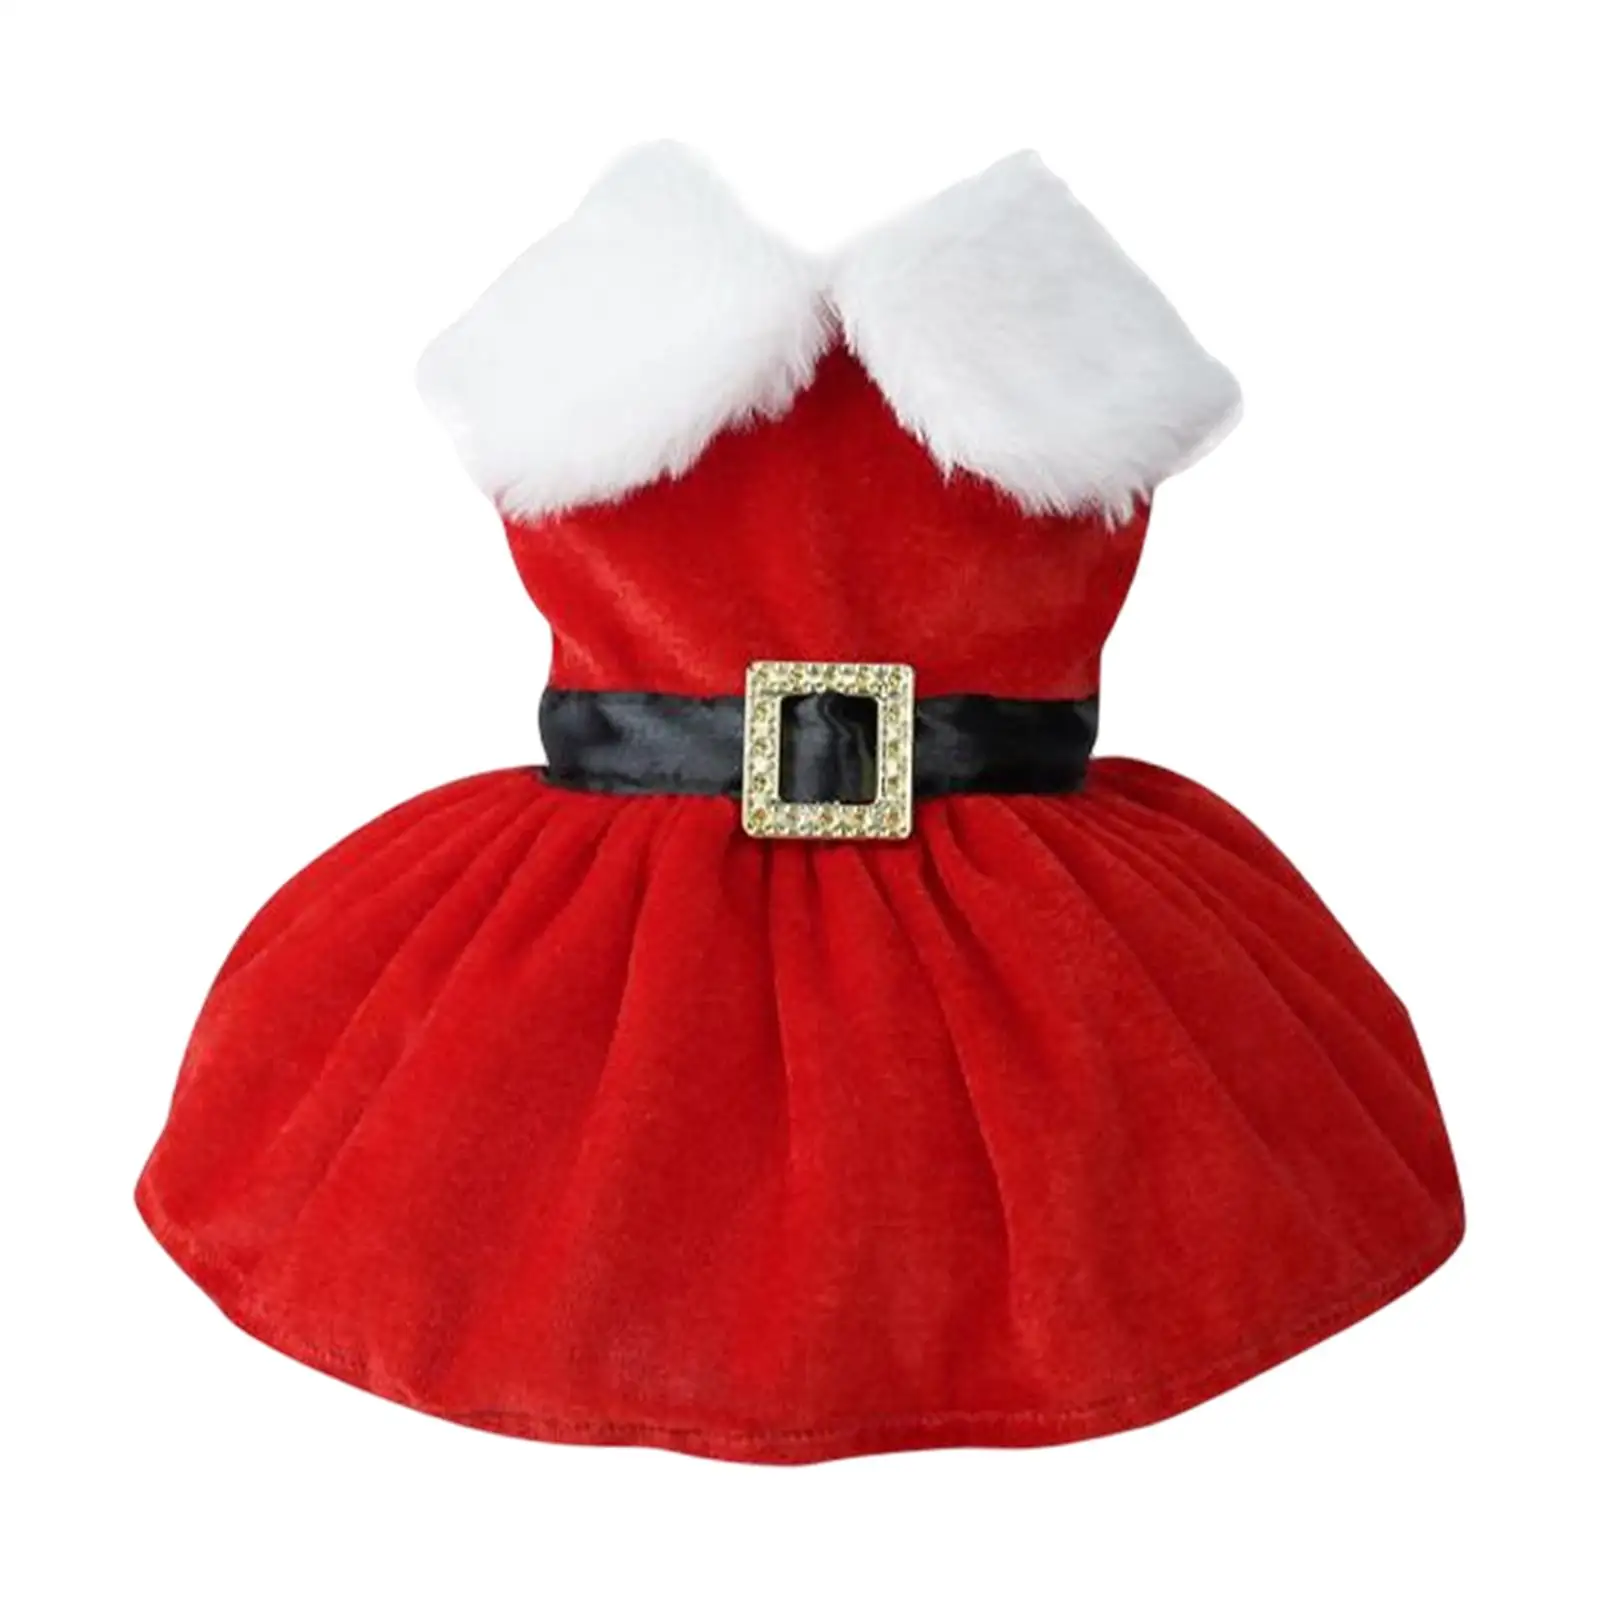 Pet Christmas Costume Clothes Dress up Skirt Flannel Party Outfit Holiday Christmas Dress Clothing Soft Comfortable Cosplay Coat